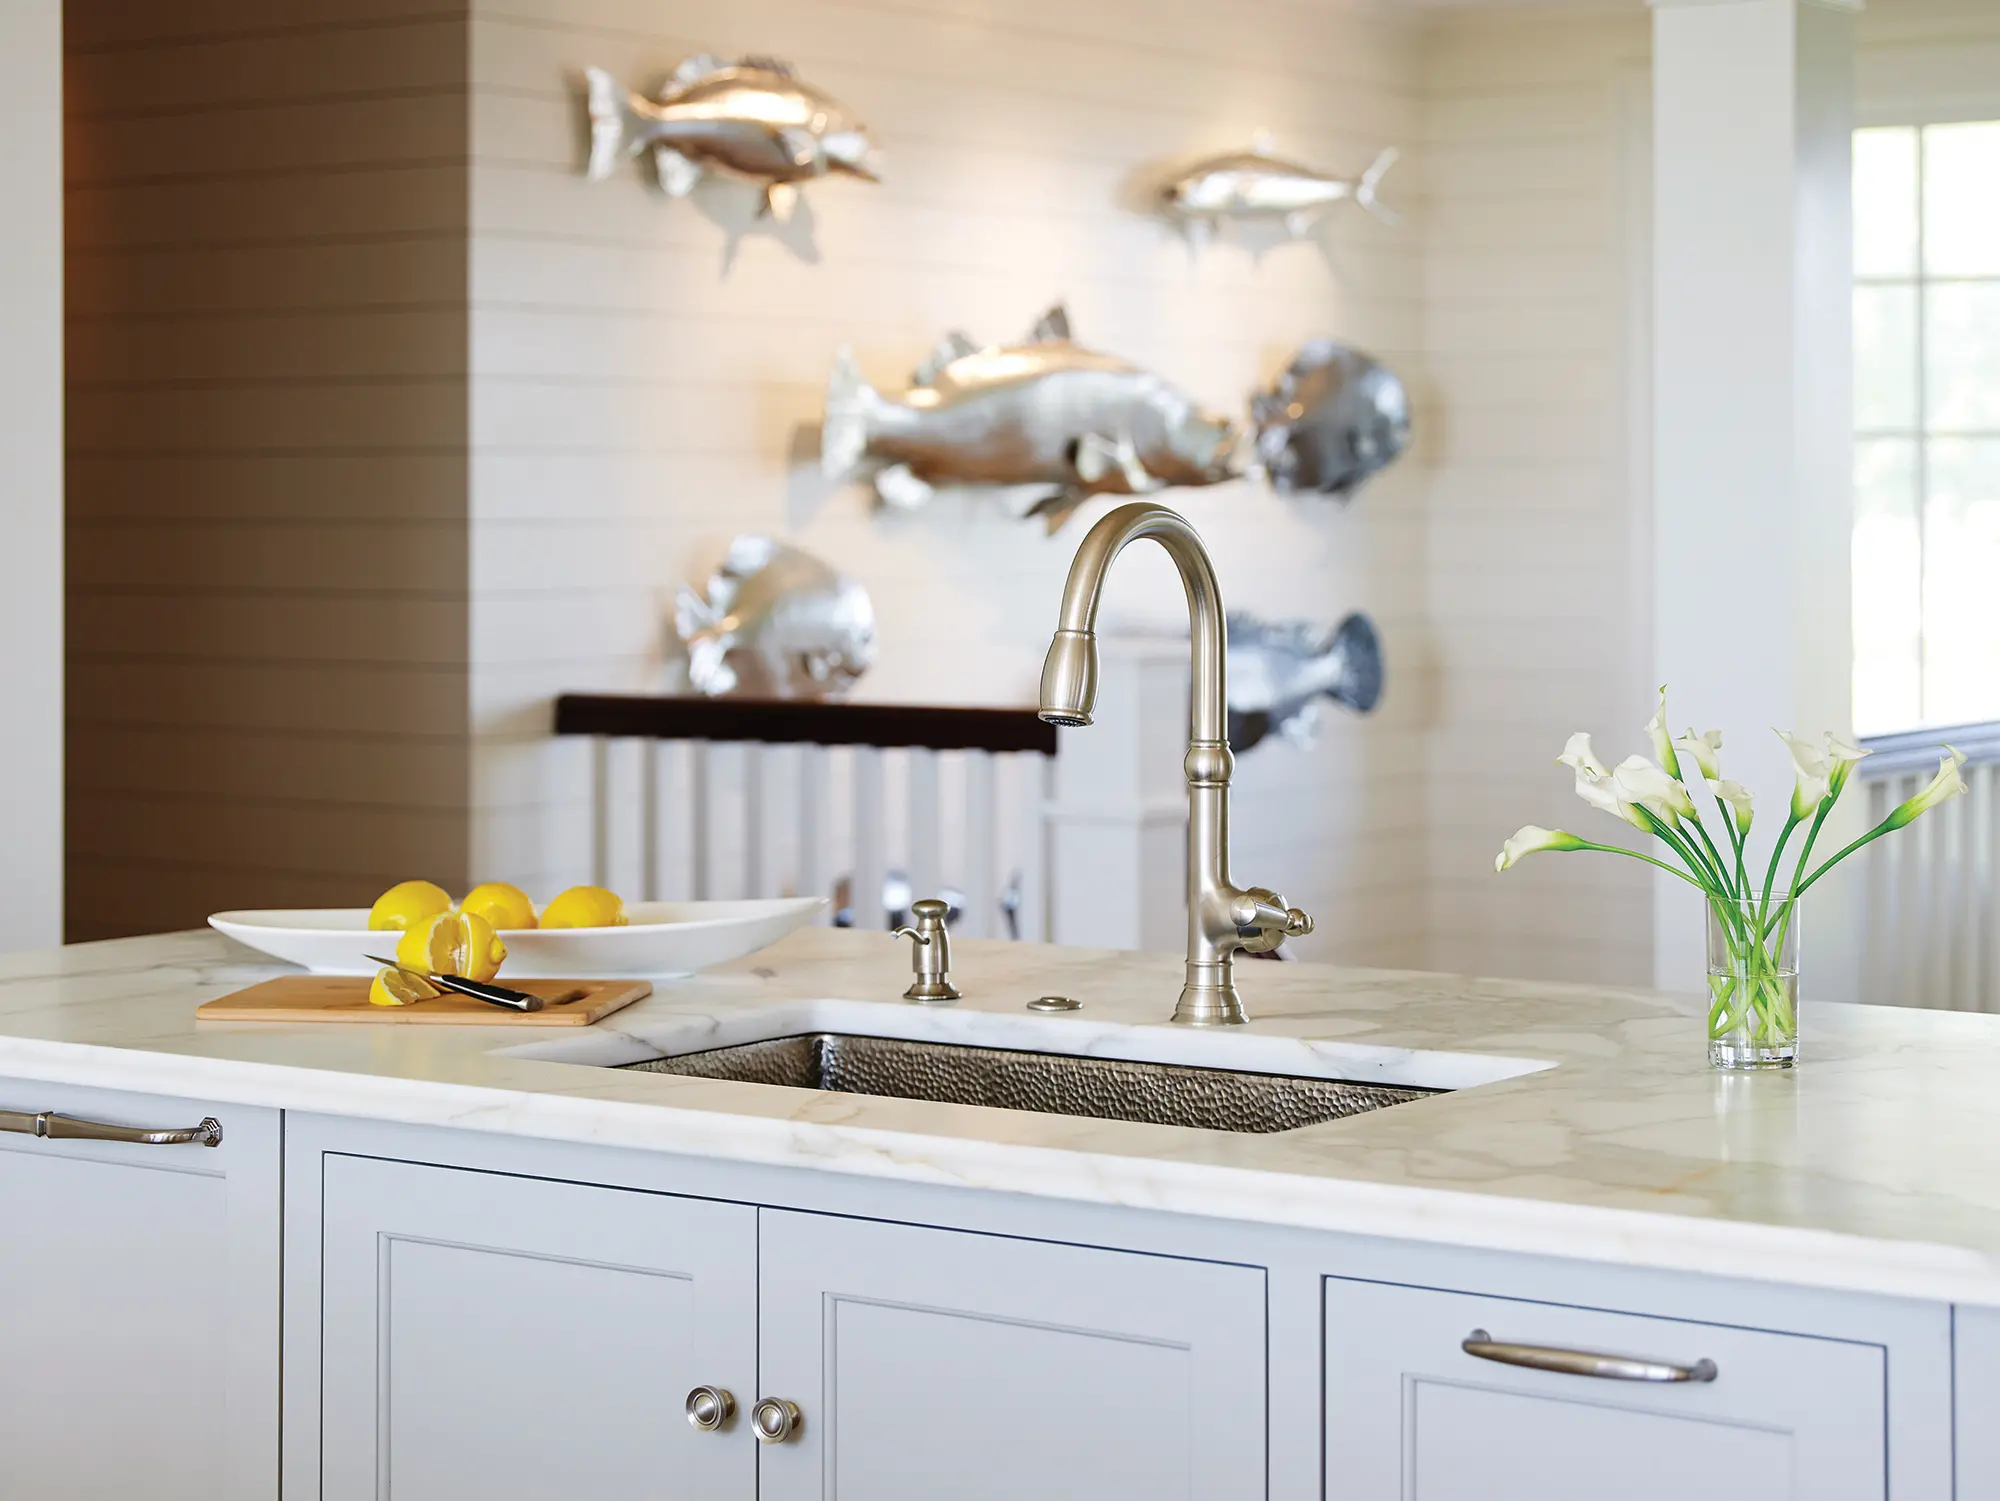 A view of the white marble countertop with hammer finished sink and steel decorative fish in the background.